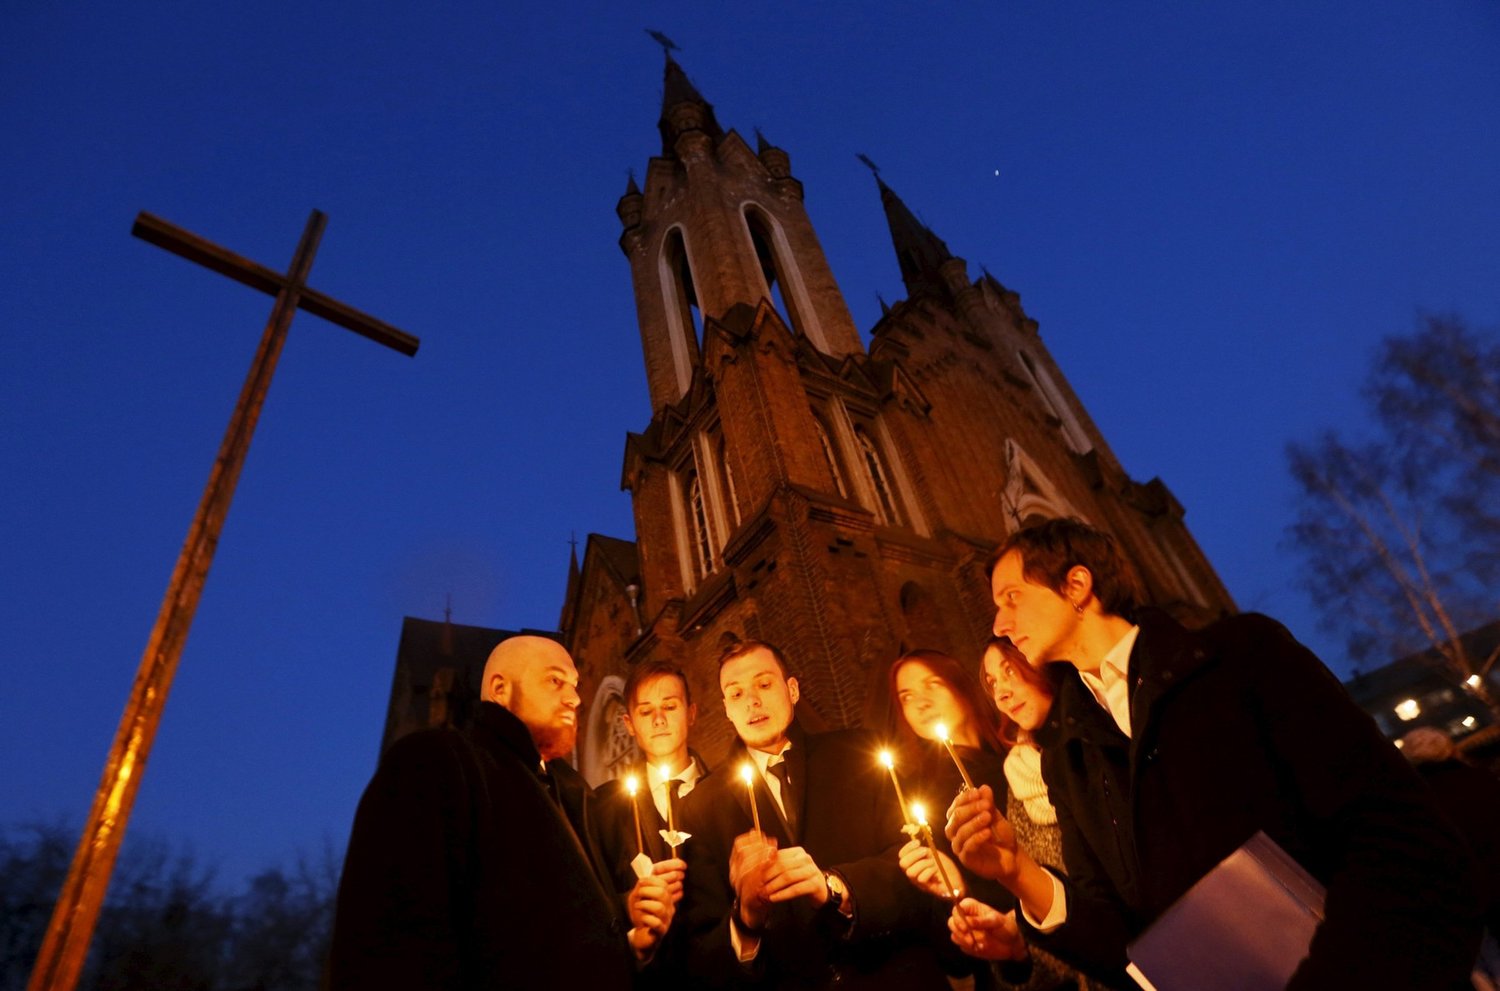 People light candles in front of a Catholic church during the Easter Vigil in the Siberian city of Krasnoyarsk, Russia, April 4, 2015.